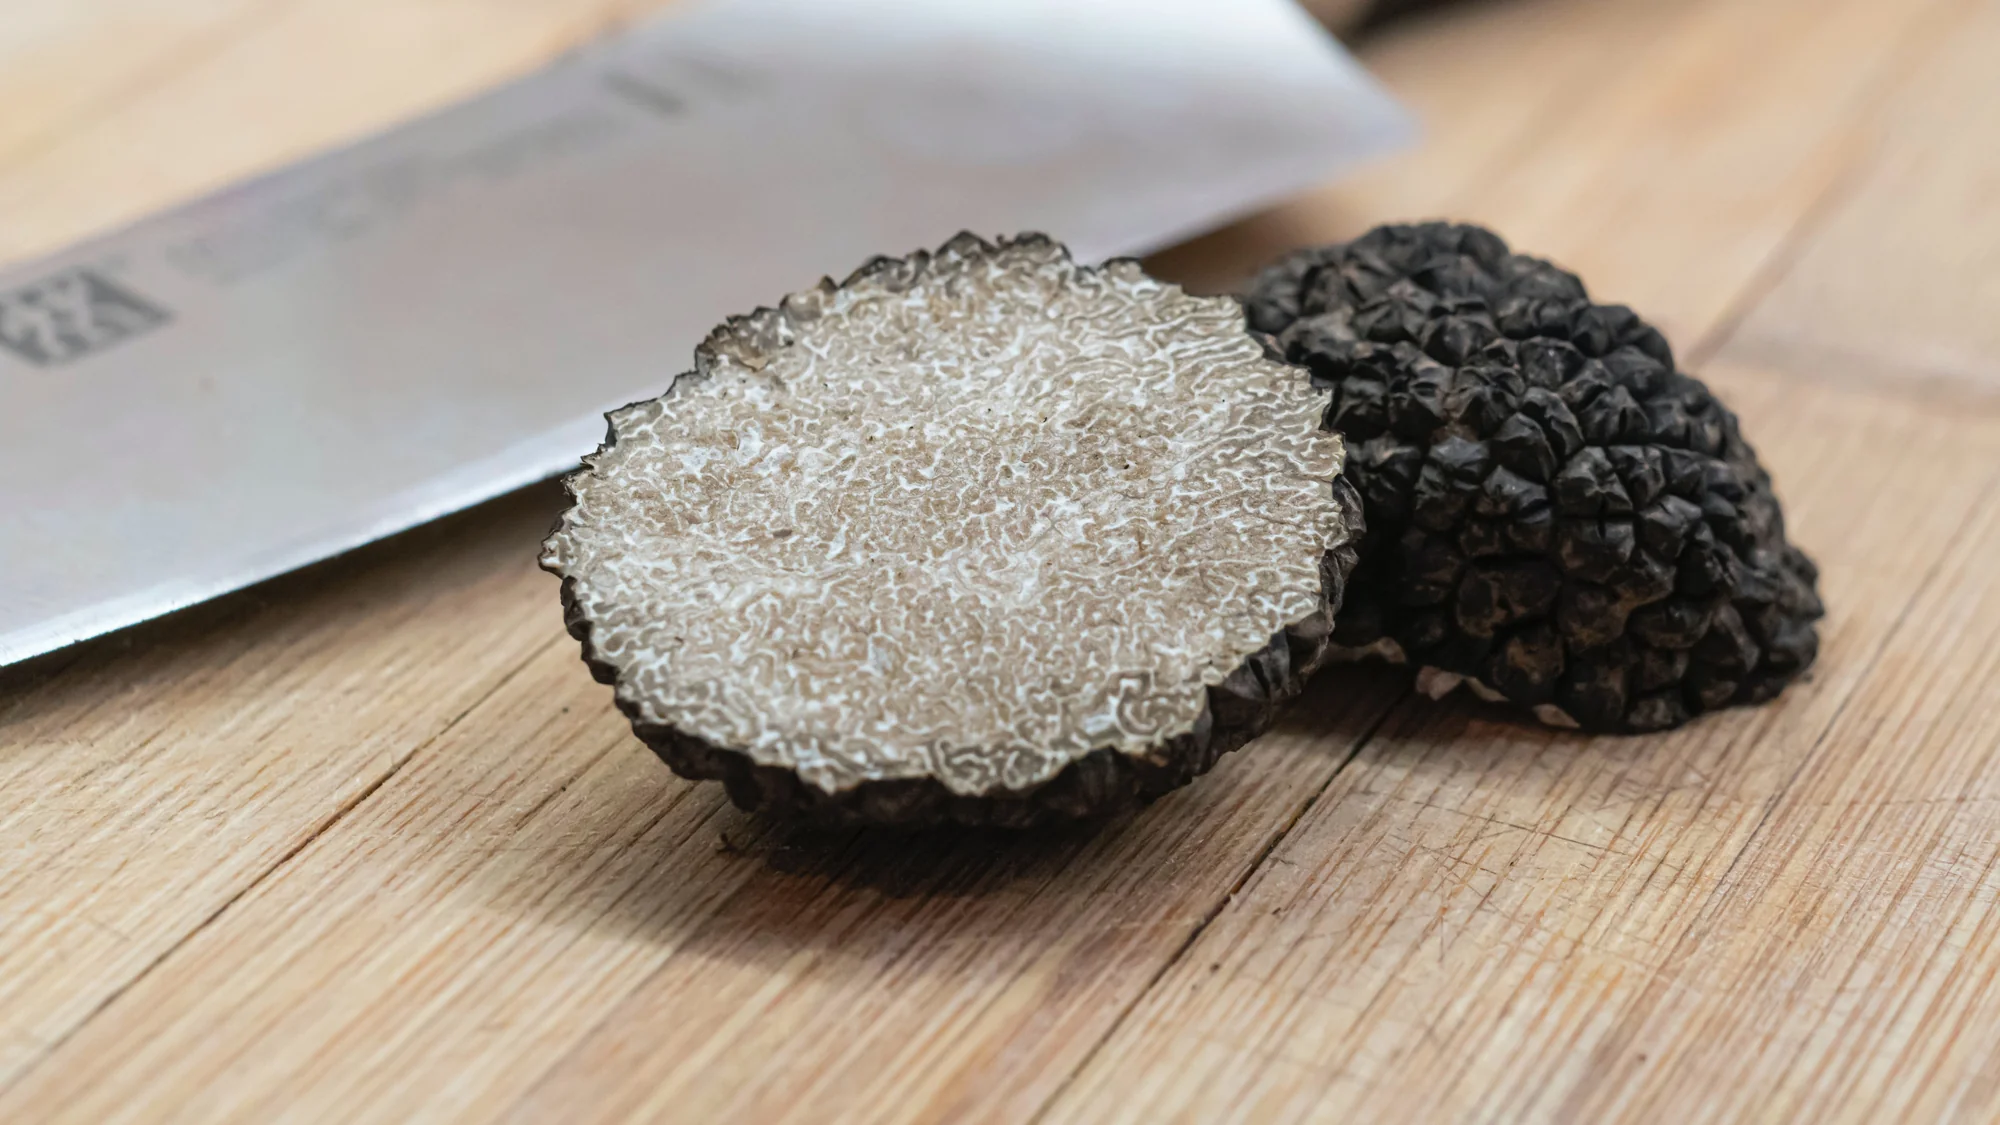 Culinary Icon: Truffles have been revered in gastronomy for centuries, with renowned chefs incorporating them into dishes to add depth and complexity of flavor. ]]>